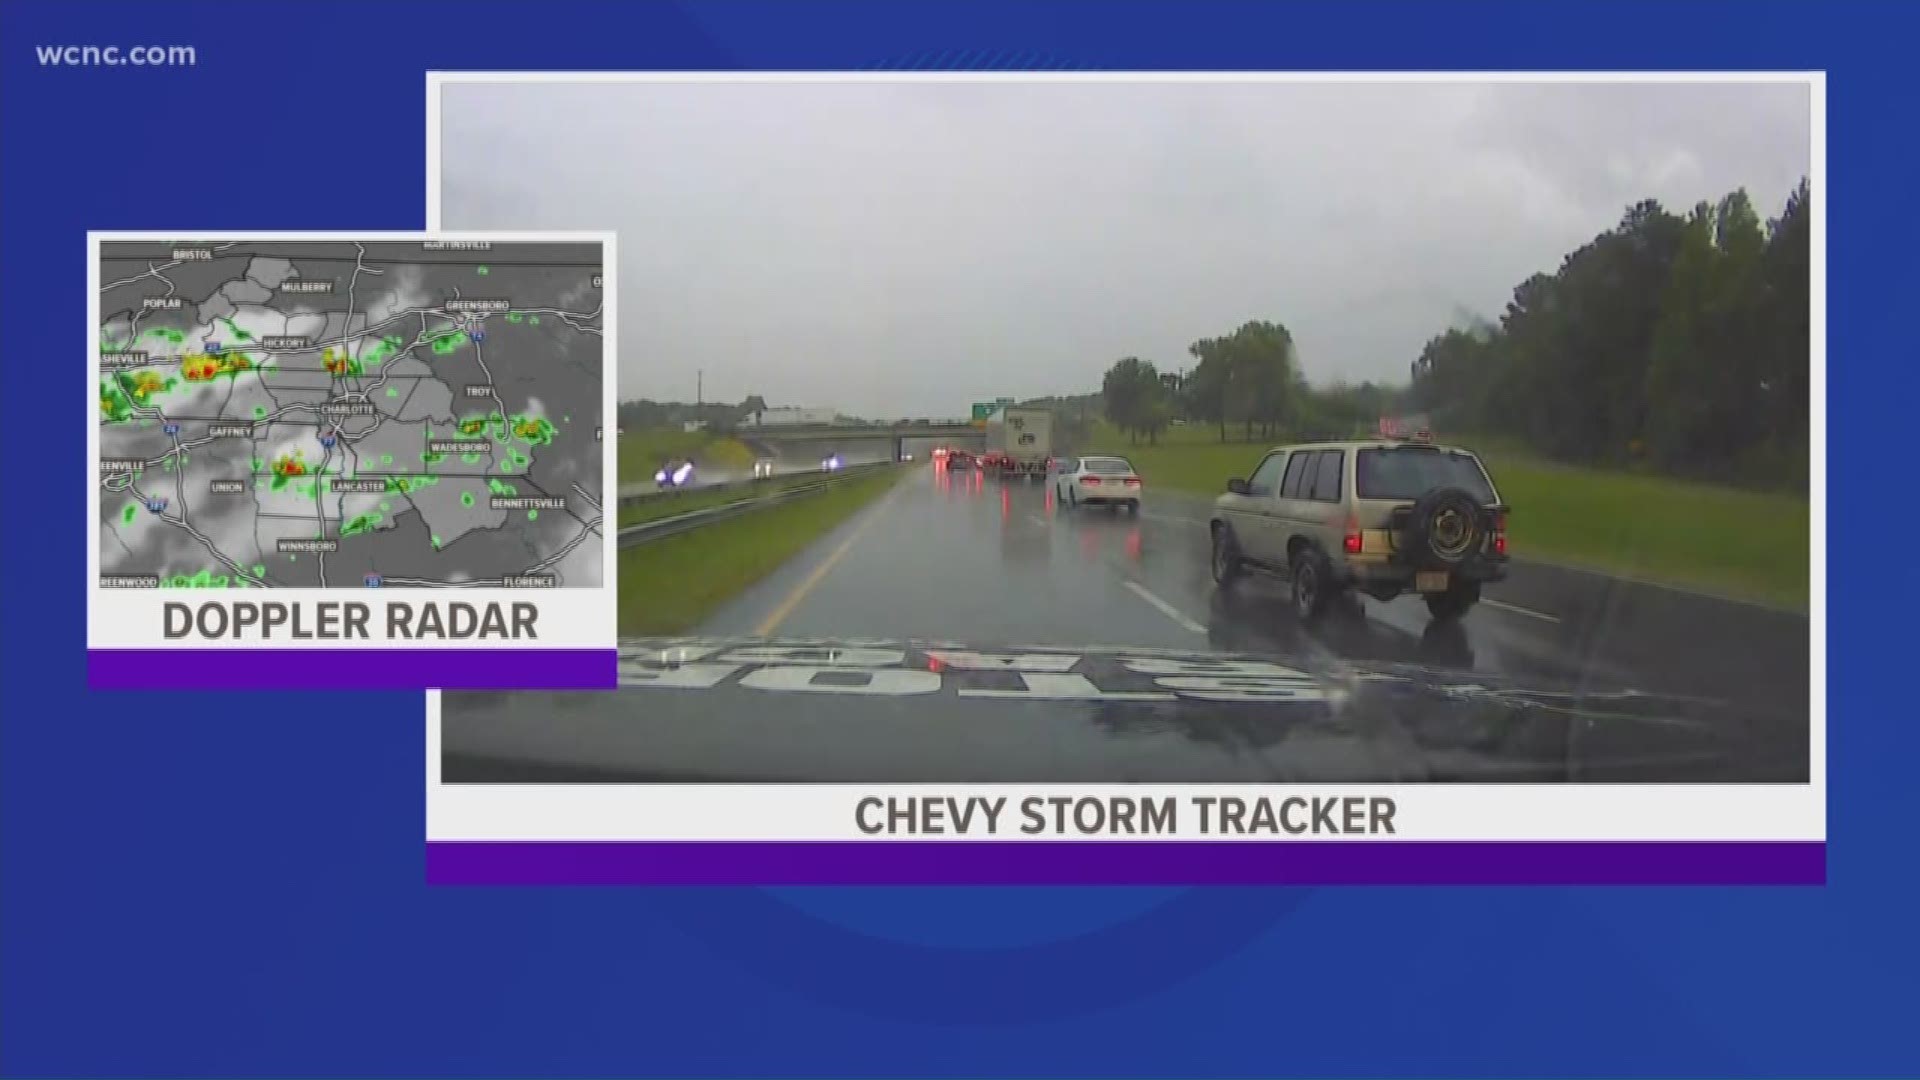 The Chevy Storm Tracker is on U.S. 321 and tracking severe thunderstorms.